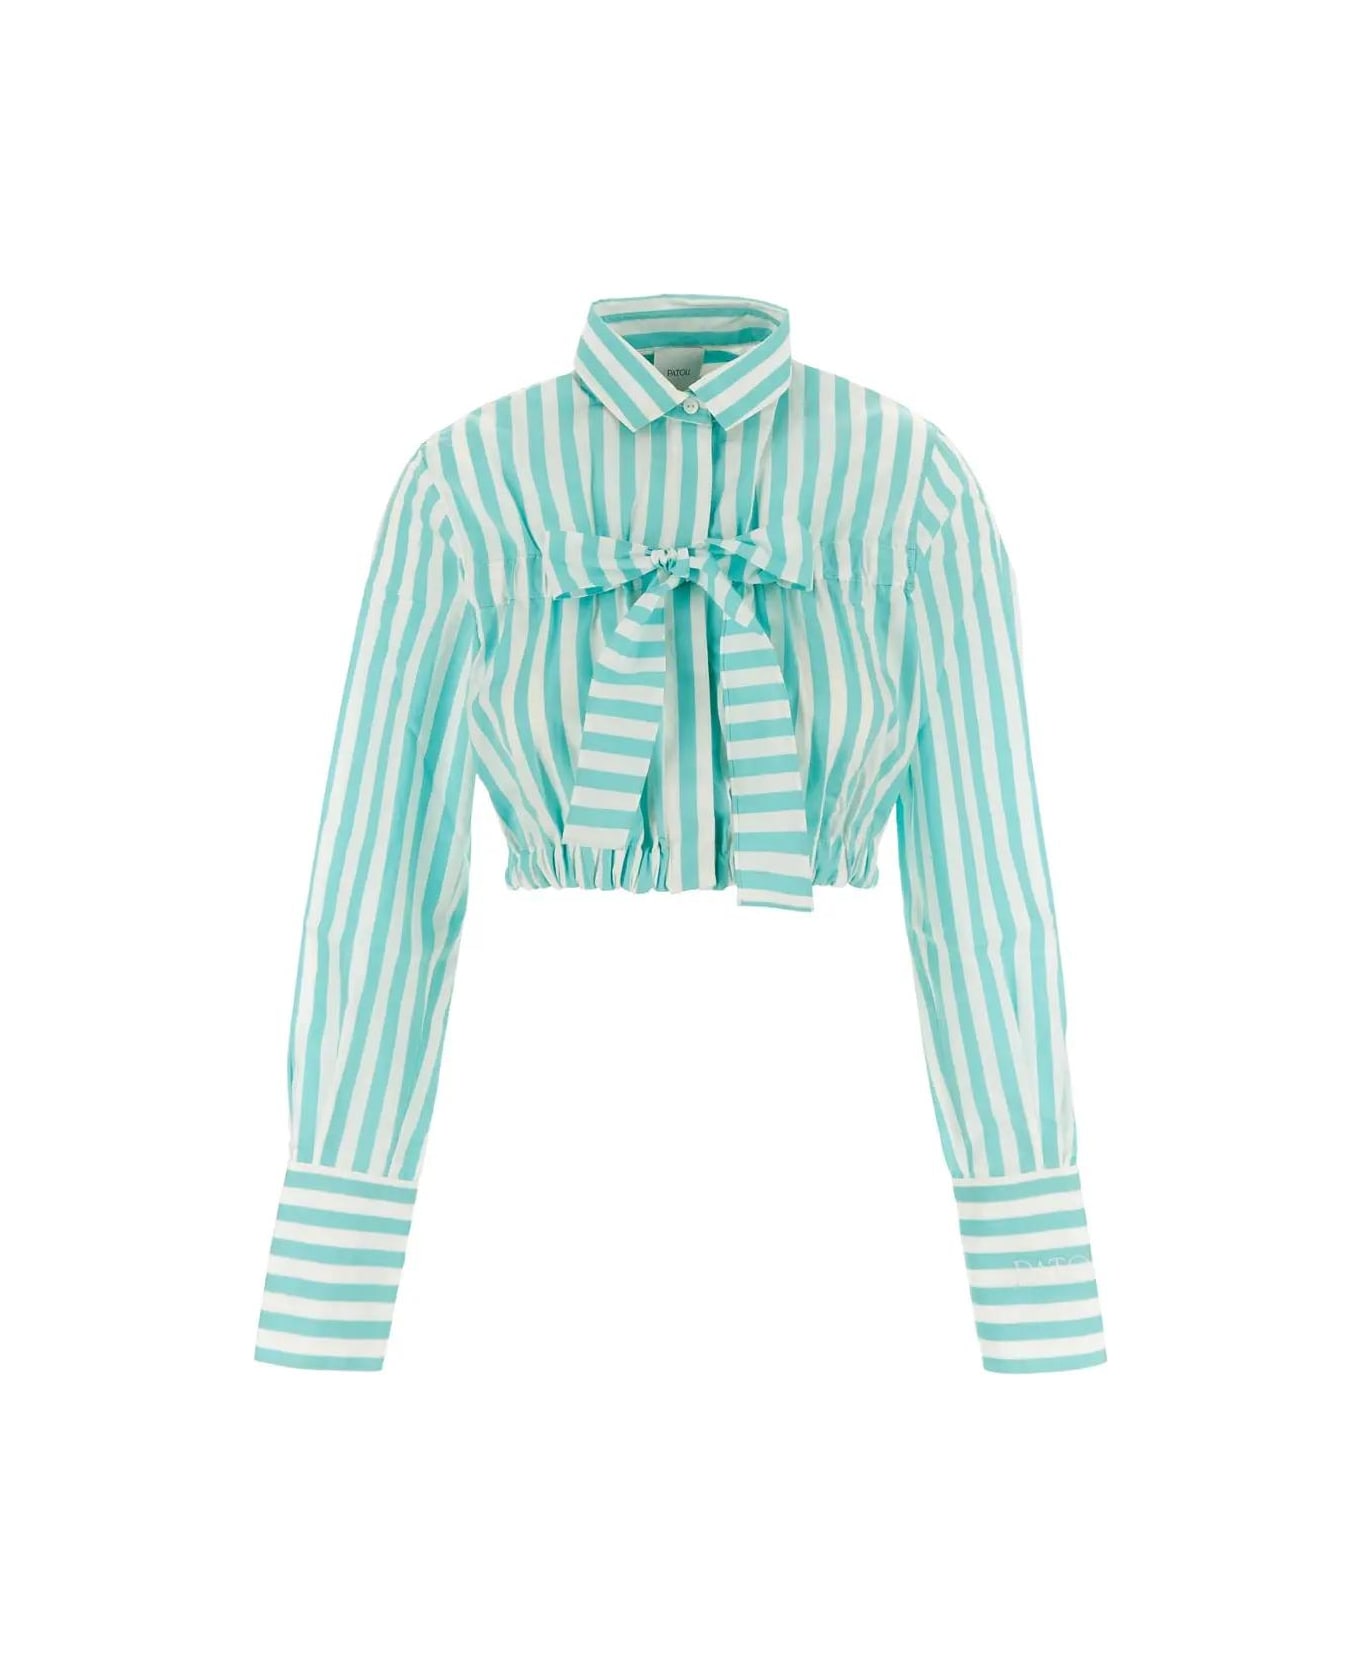 Patou Cropped Bow Shirt - White and green